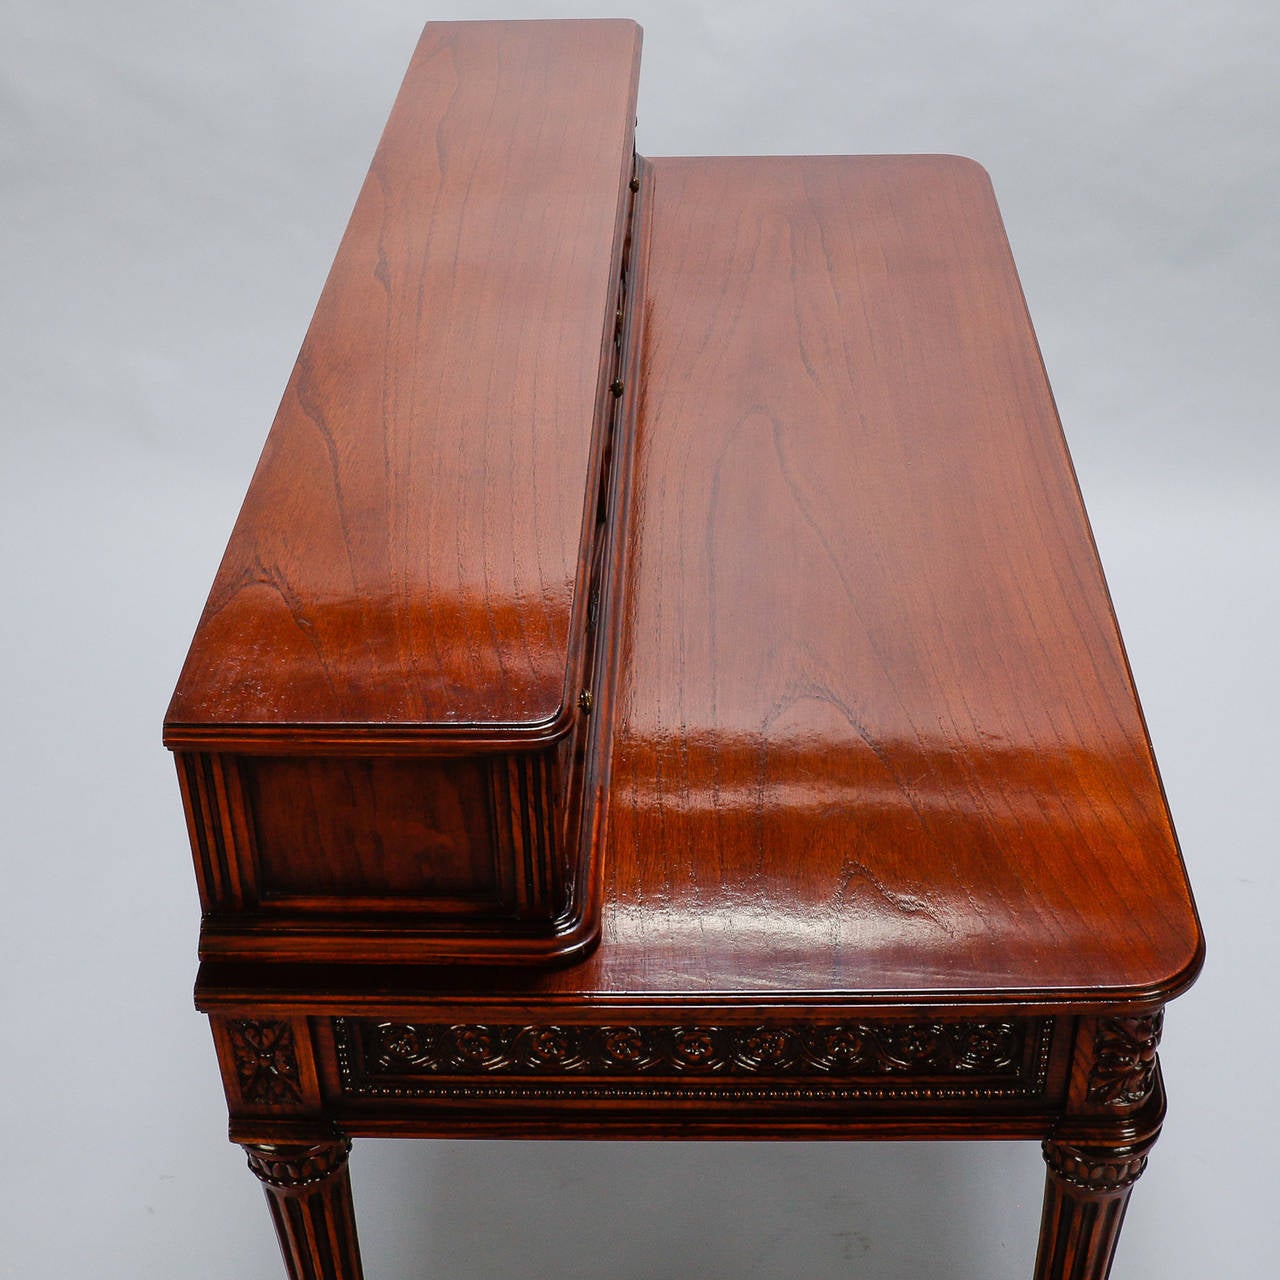 This elegant French ladies writing desk dates from the 1920s and is loaded with beautiful details. The back plinth has three sections of two small functional drawers separated by two small hinged compartments. Beneath the writing surface are three